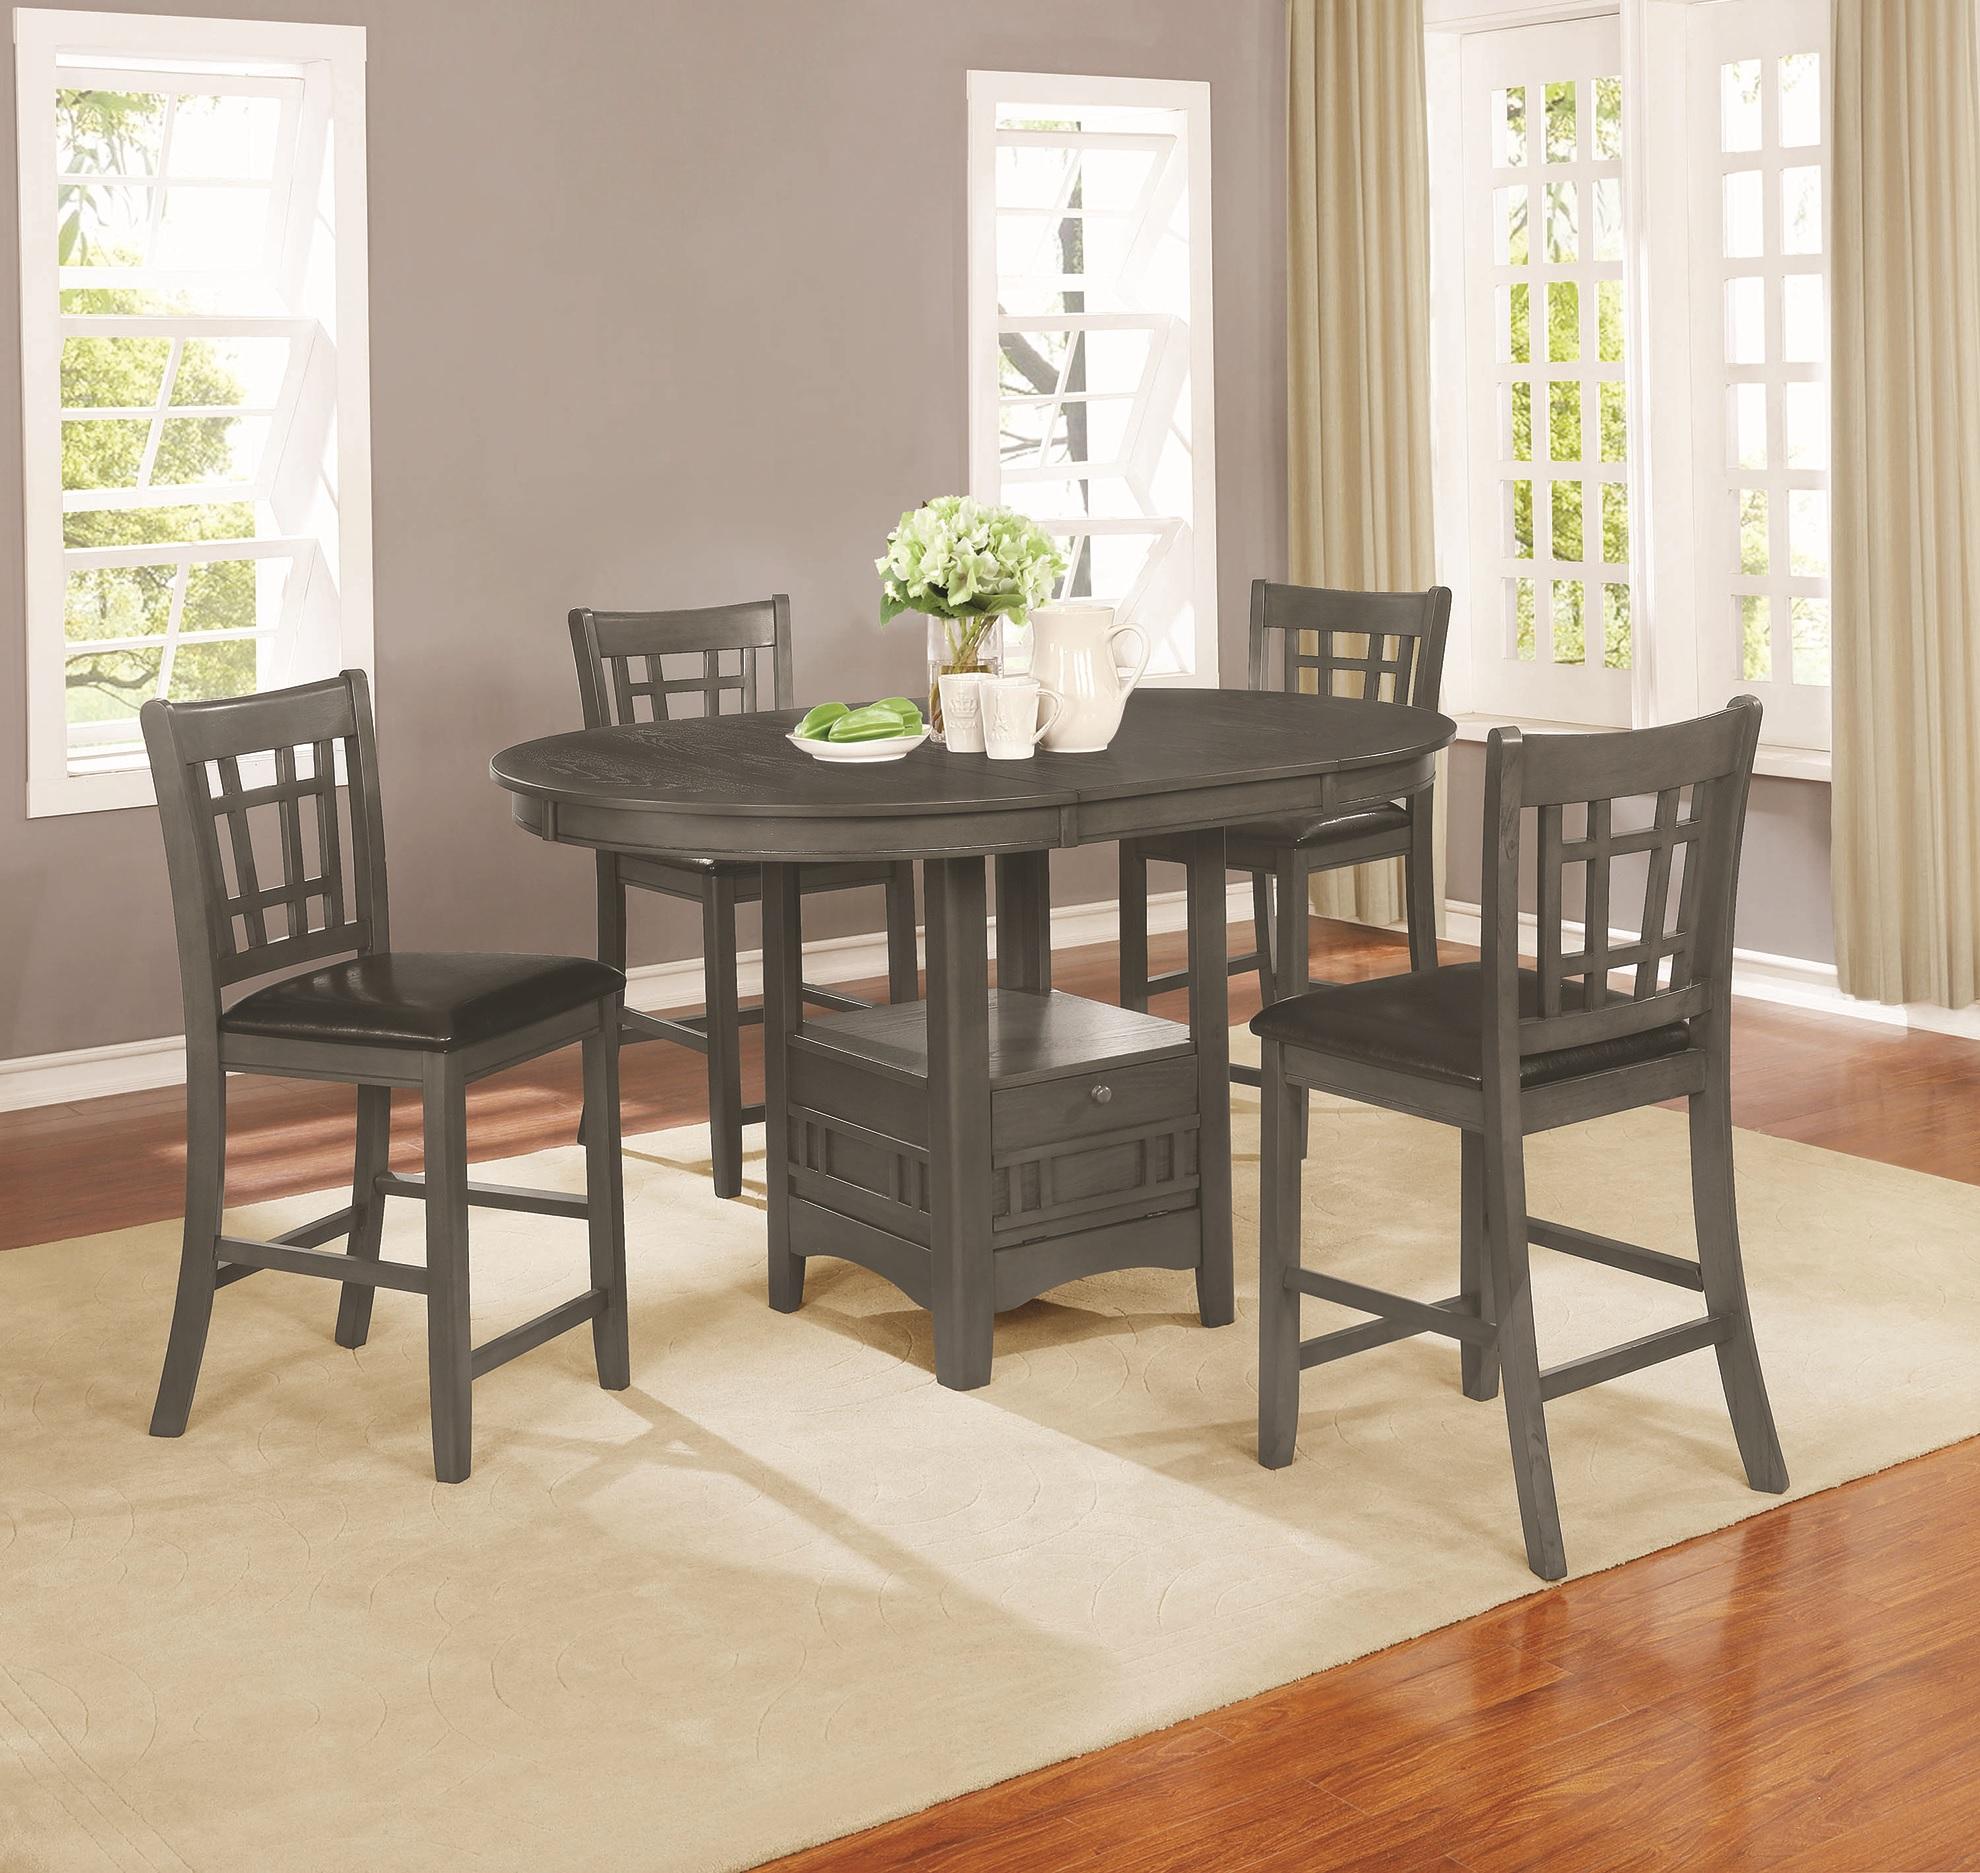 Transitional Dining Room Set 108218-S5 Lavon 108218-S5 in Gray Leatherette